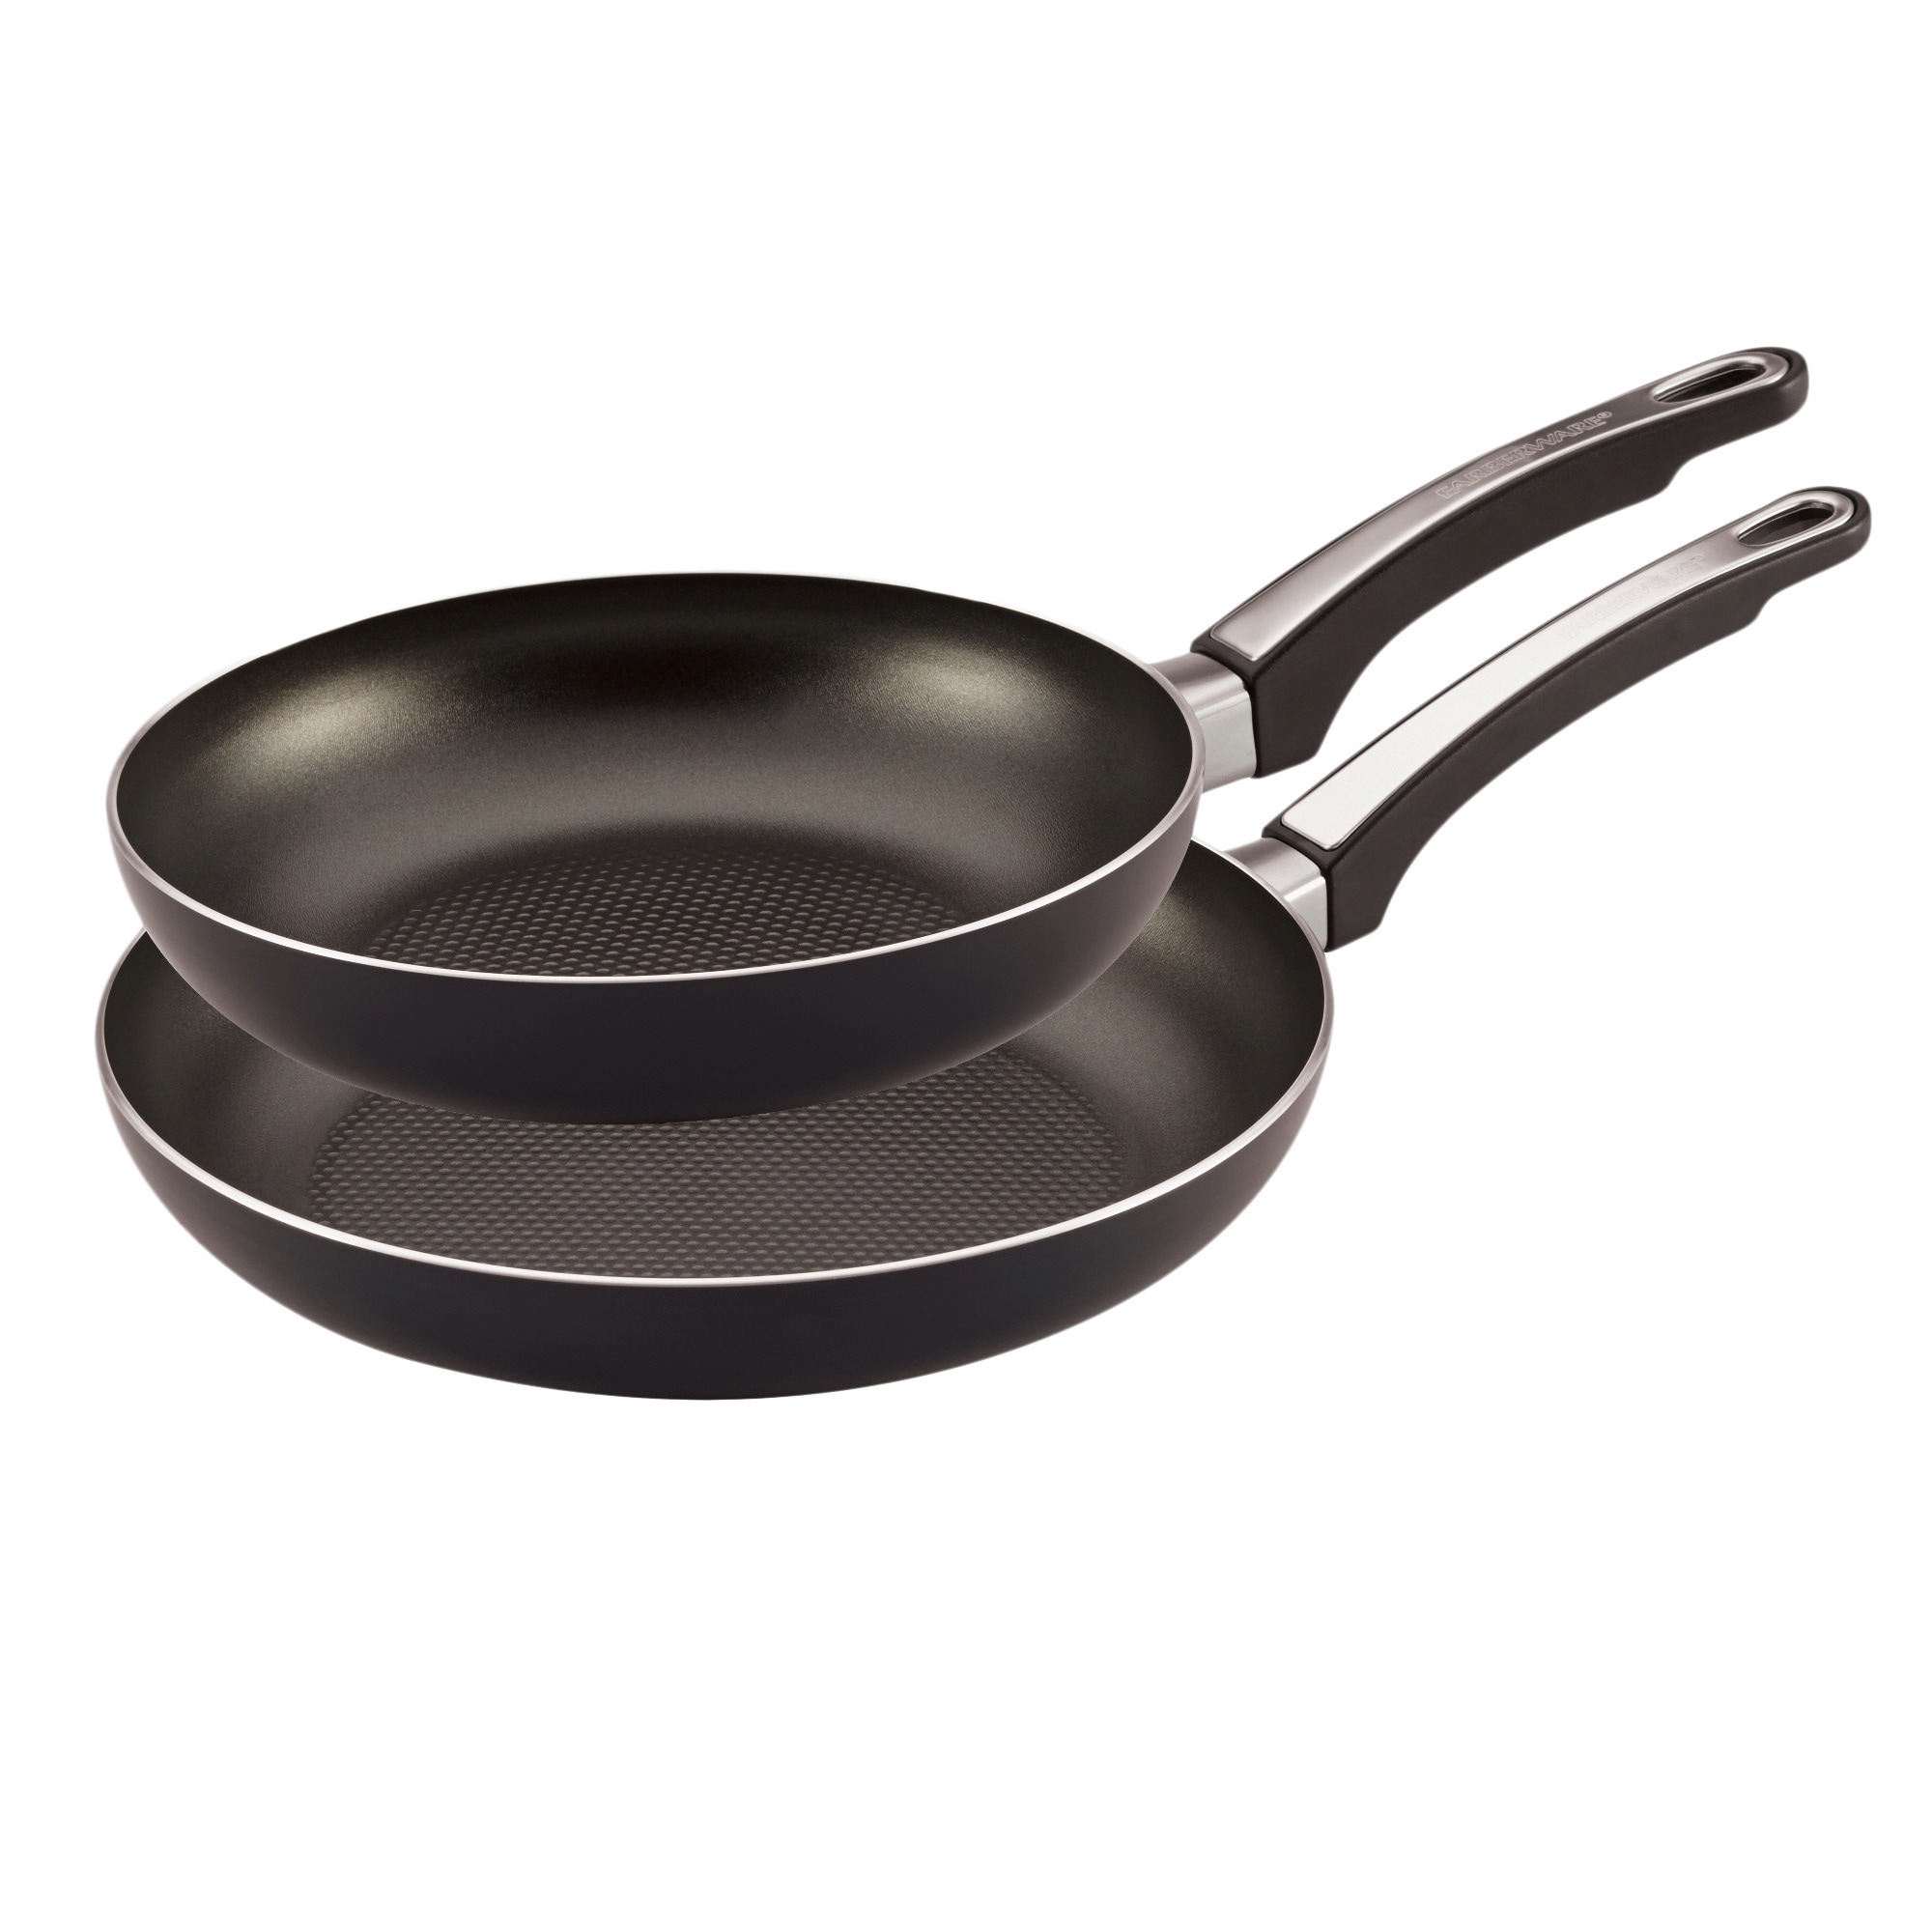 https://ak1.ostkcdn.com/images/products/8891286/Farberware-High-Performance-Nonstick-Aluminum-9-inch-and-11-inch-2-piece-Black-Skillet-Set-b023b32c-2293-4f01-8077-d7e476b6a1b7.jpg